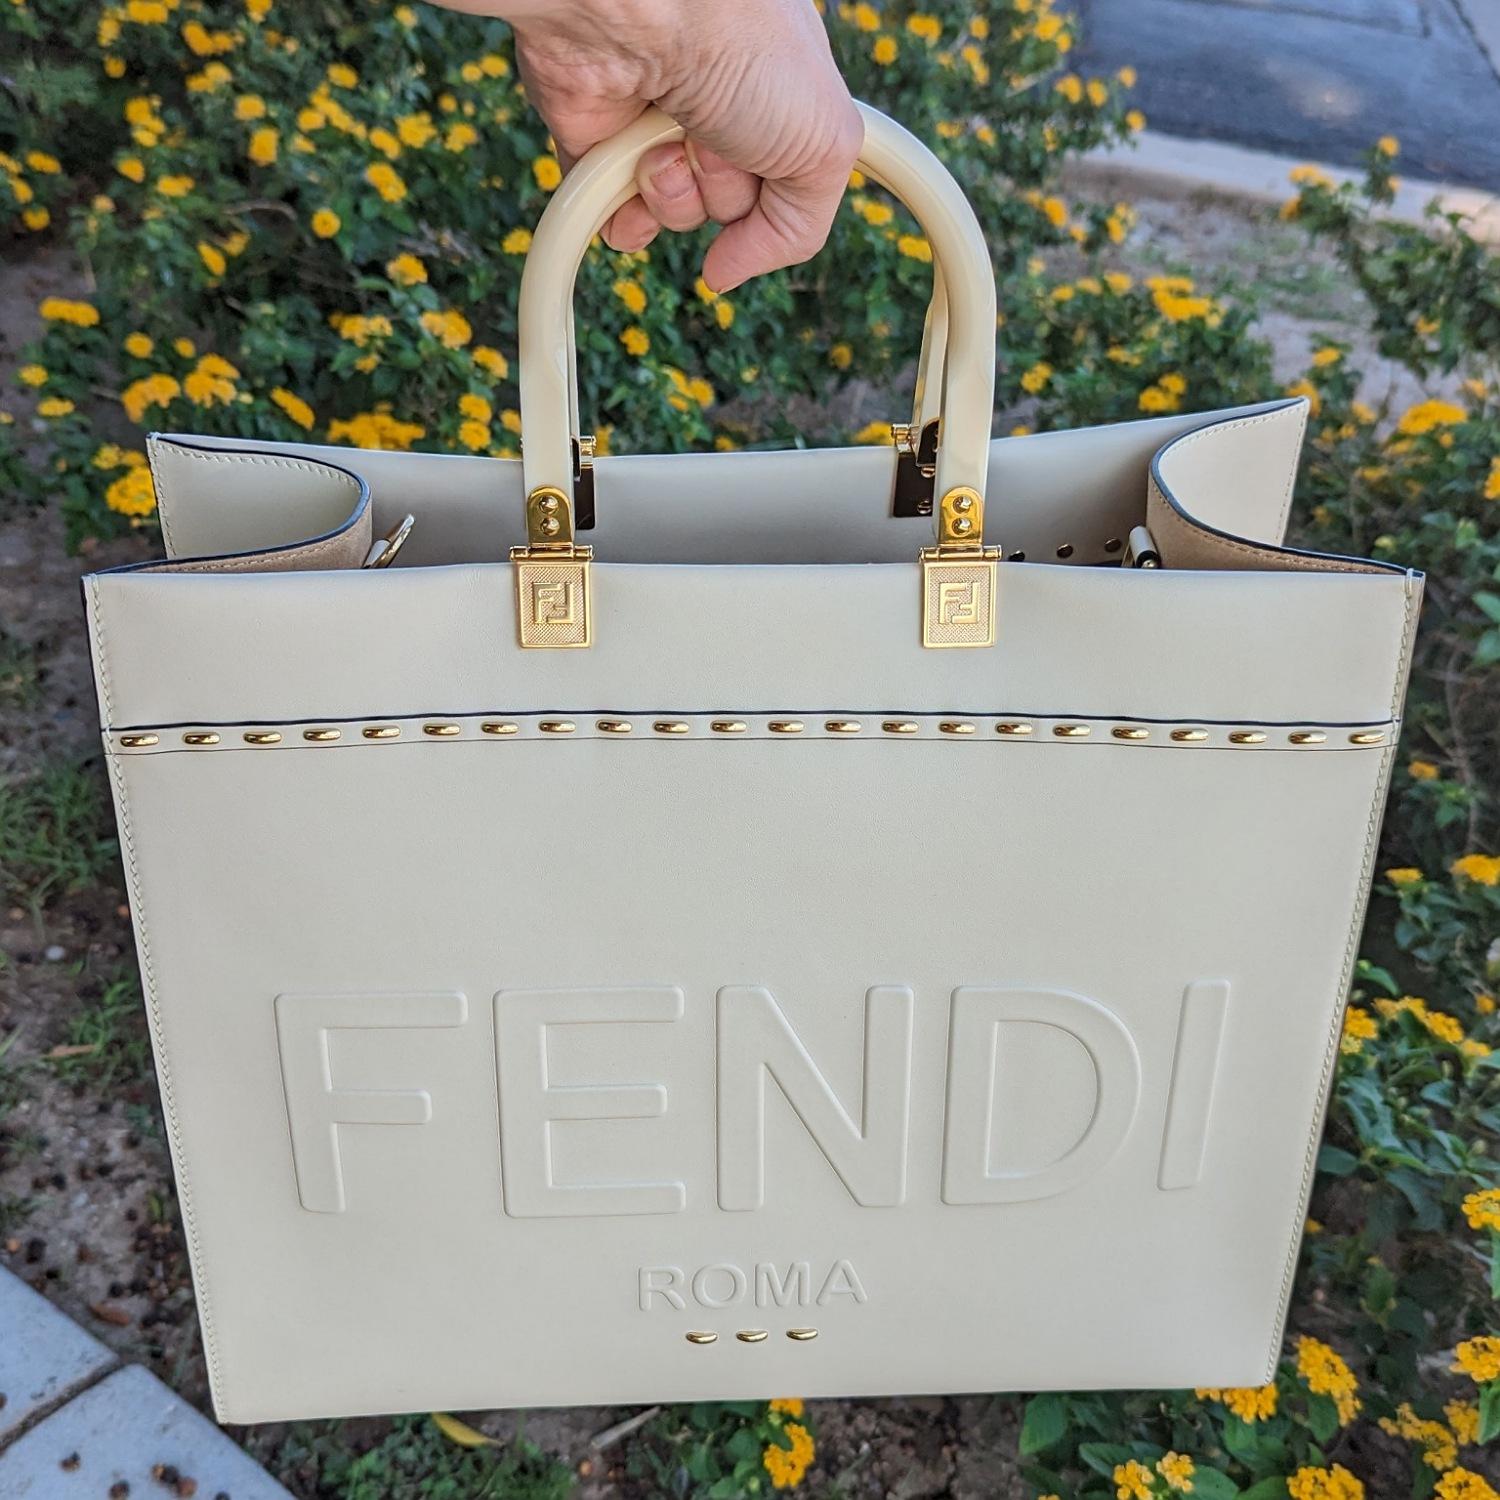 Medium Sunshine Shopper bag made of creme leather with heat-stamped “FENDI ROMA” and stiff plexiglass handles. Edges in tone on tone leather with gold-finish metal hardware. Can be carried by hand or worn on the shoulder thanks to the two handles